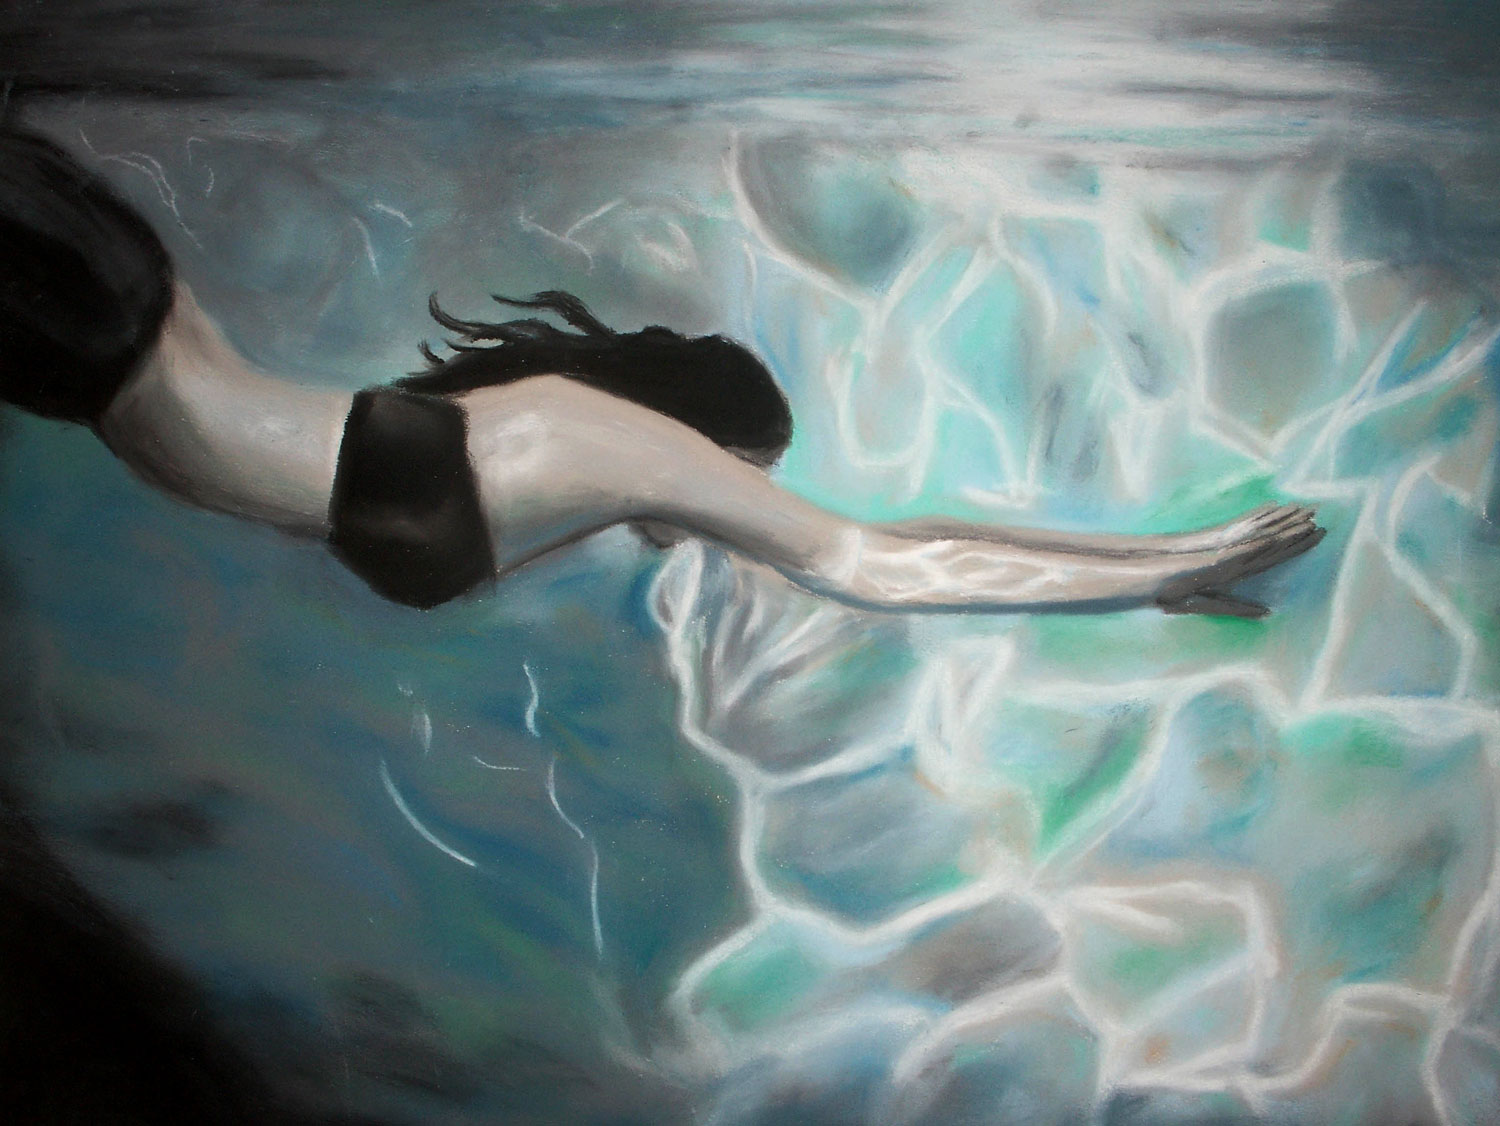 Student artwork of a girl swimming under water